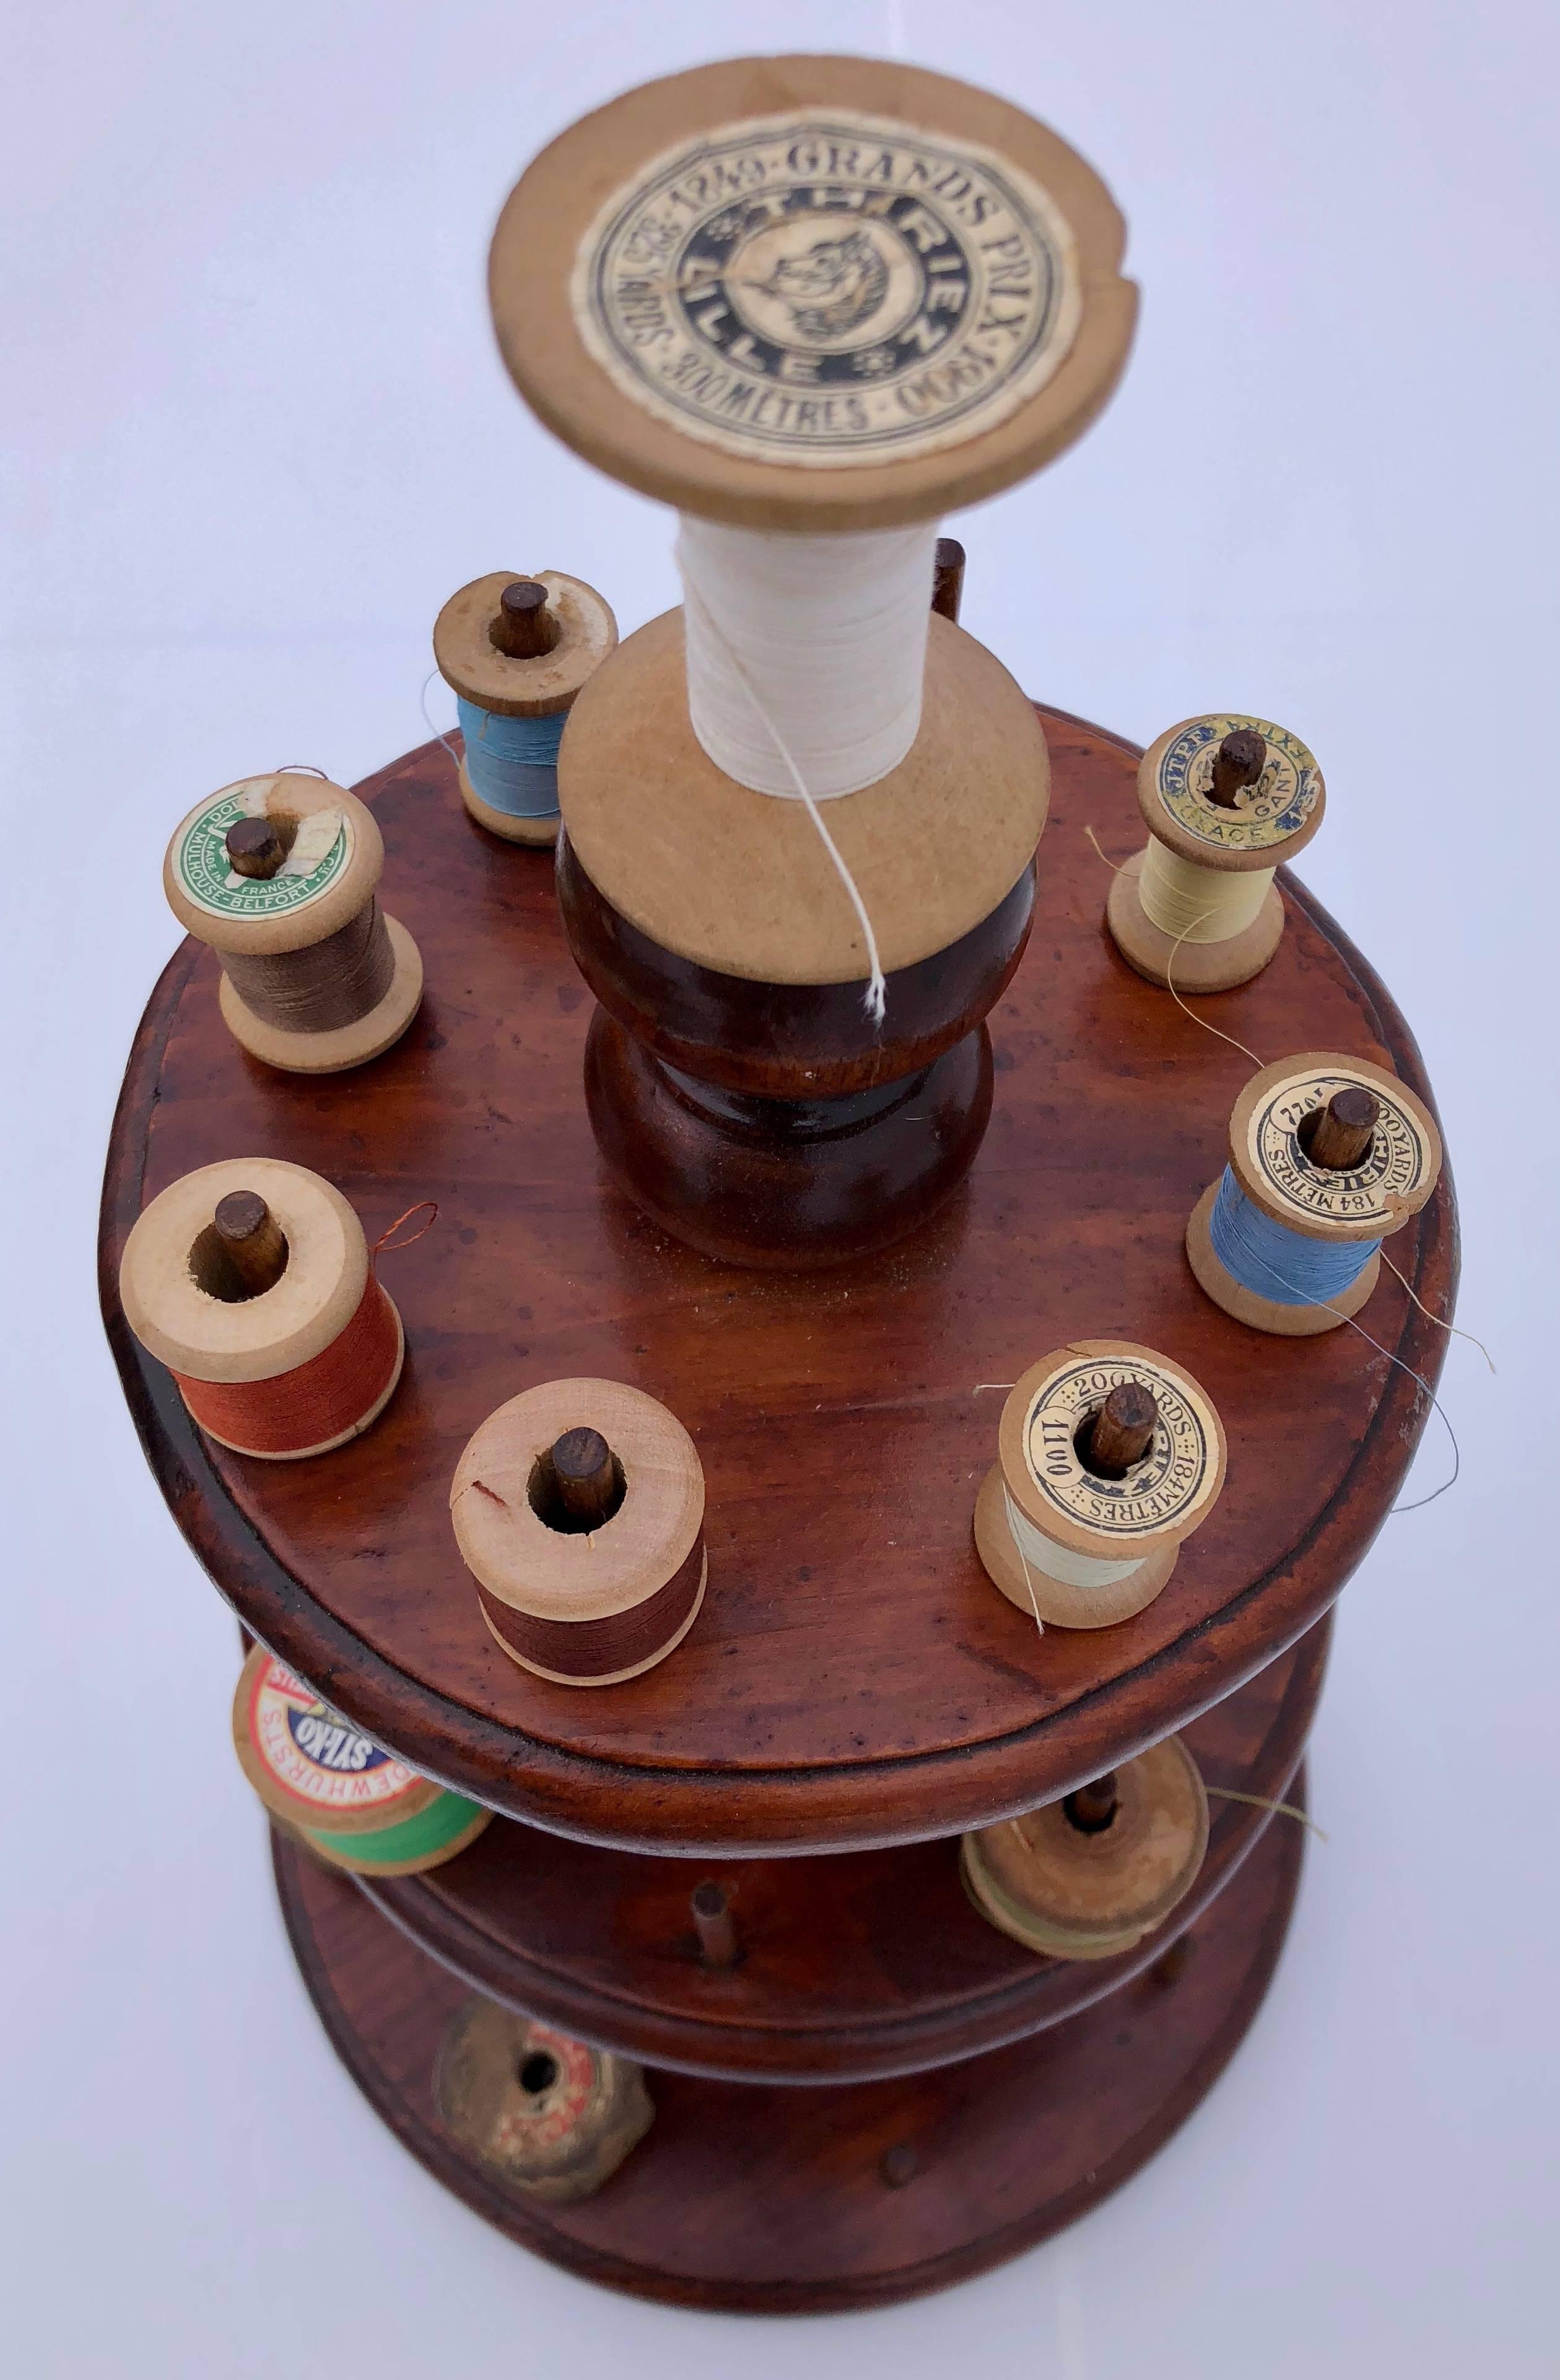 This lovely three-tiered wooden spool caddy holds over 25 spools of thread and has beautiful curved detail. The shown wooden spools are included in the lot. Displayed on a table to keep your spools of thread handy or re-purposed to hold rings or